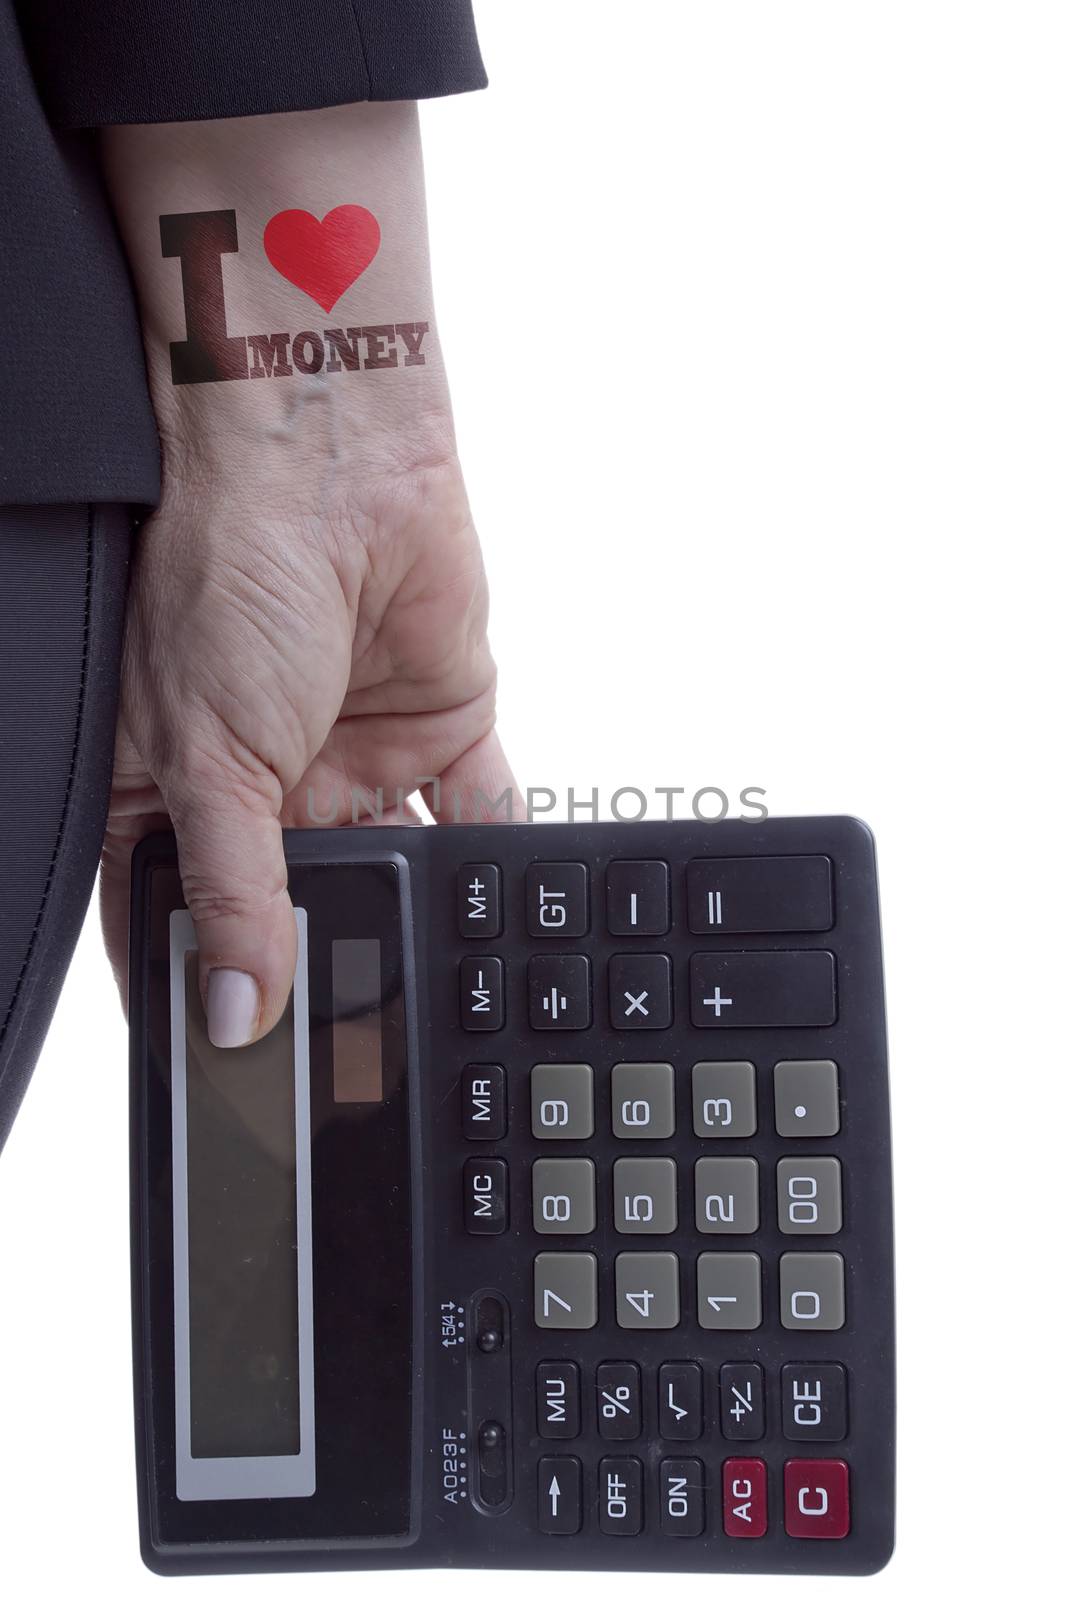 I love money. Poster on finance, female hand with a calculator.